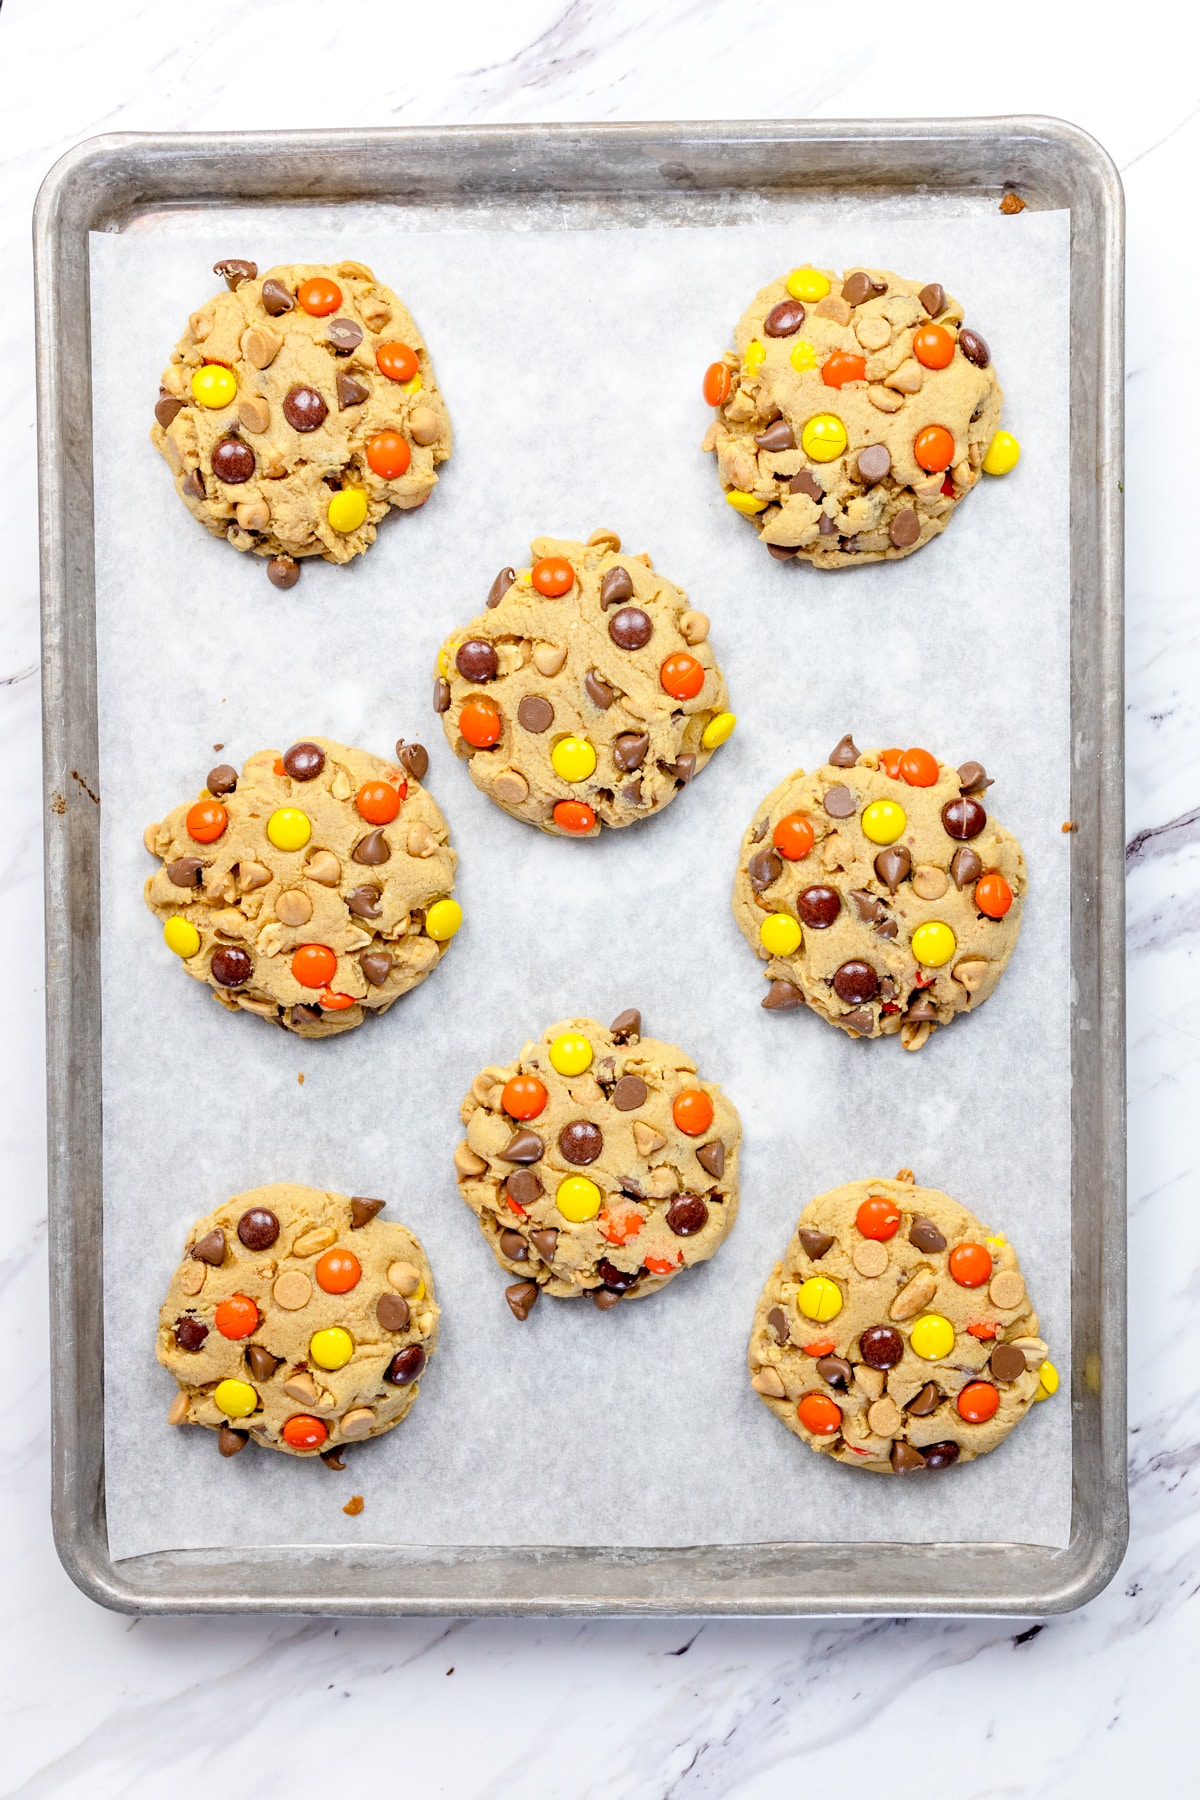 Top view of medium reeces pieces cookies on a baking tray.